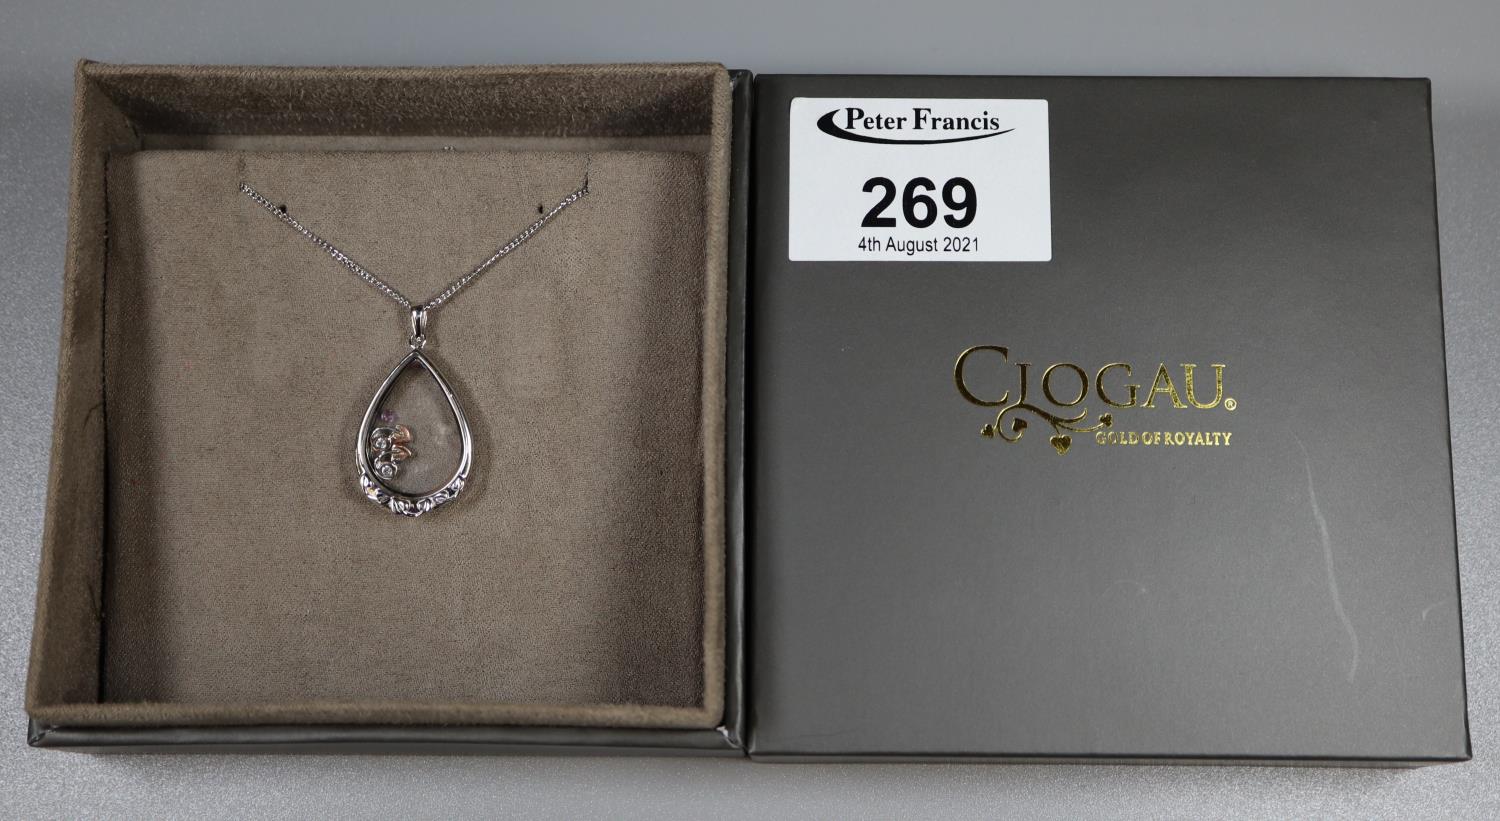 Clogau silver, ?Inner Charm? pendant and chain. (B.P. 21% + VAT)